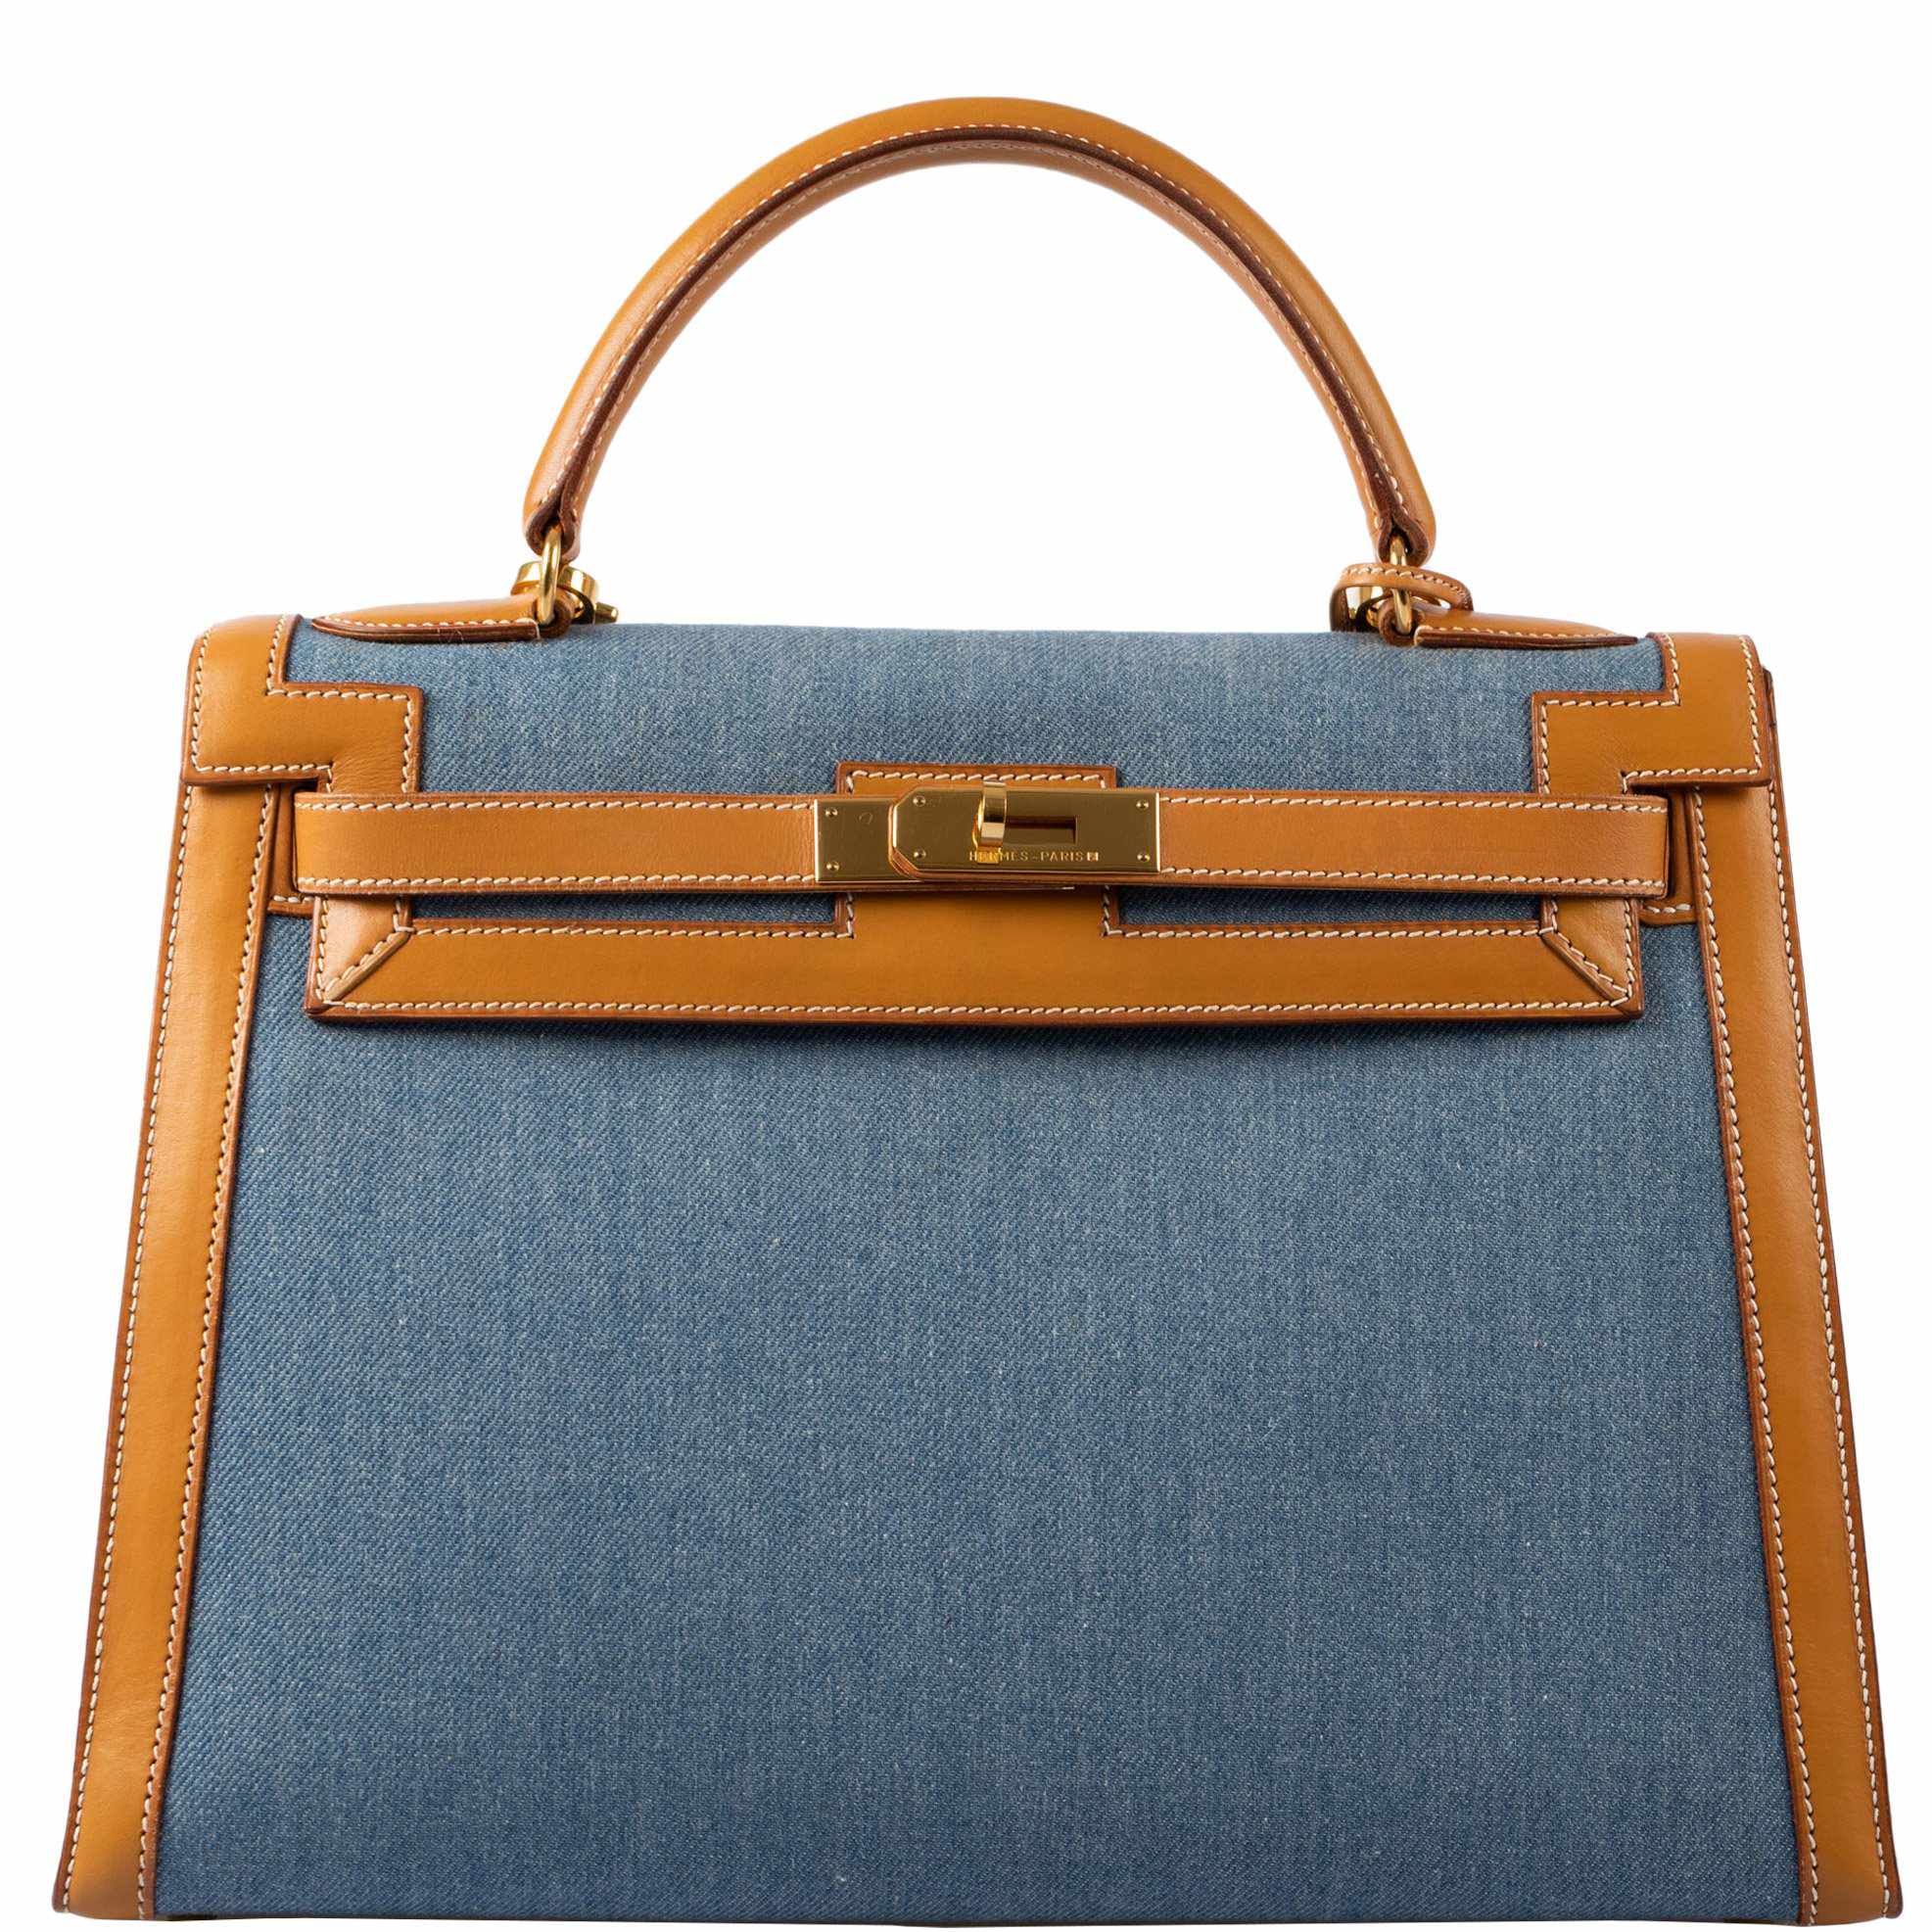 Comparing Hermes Kelly Bags 28cm and 32cm 